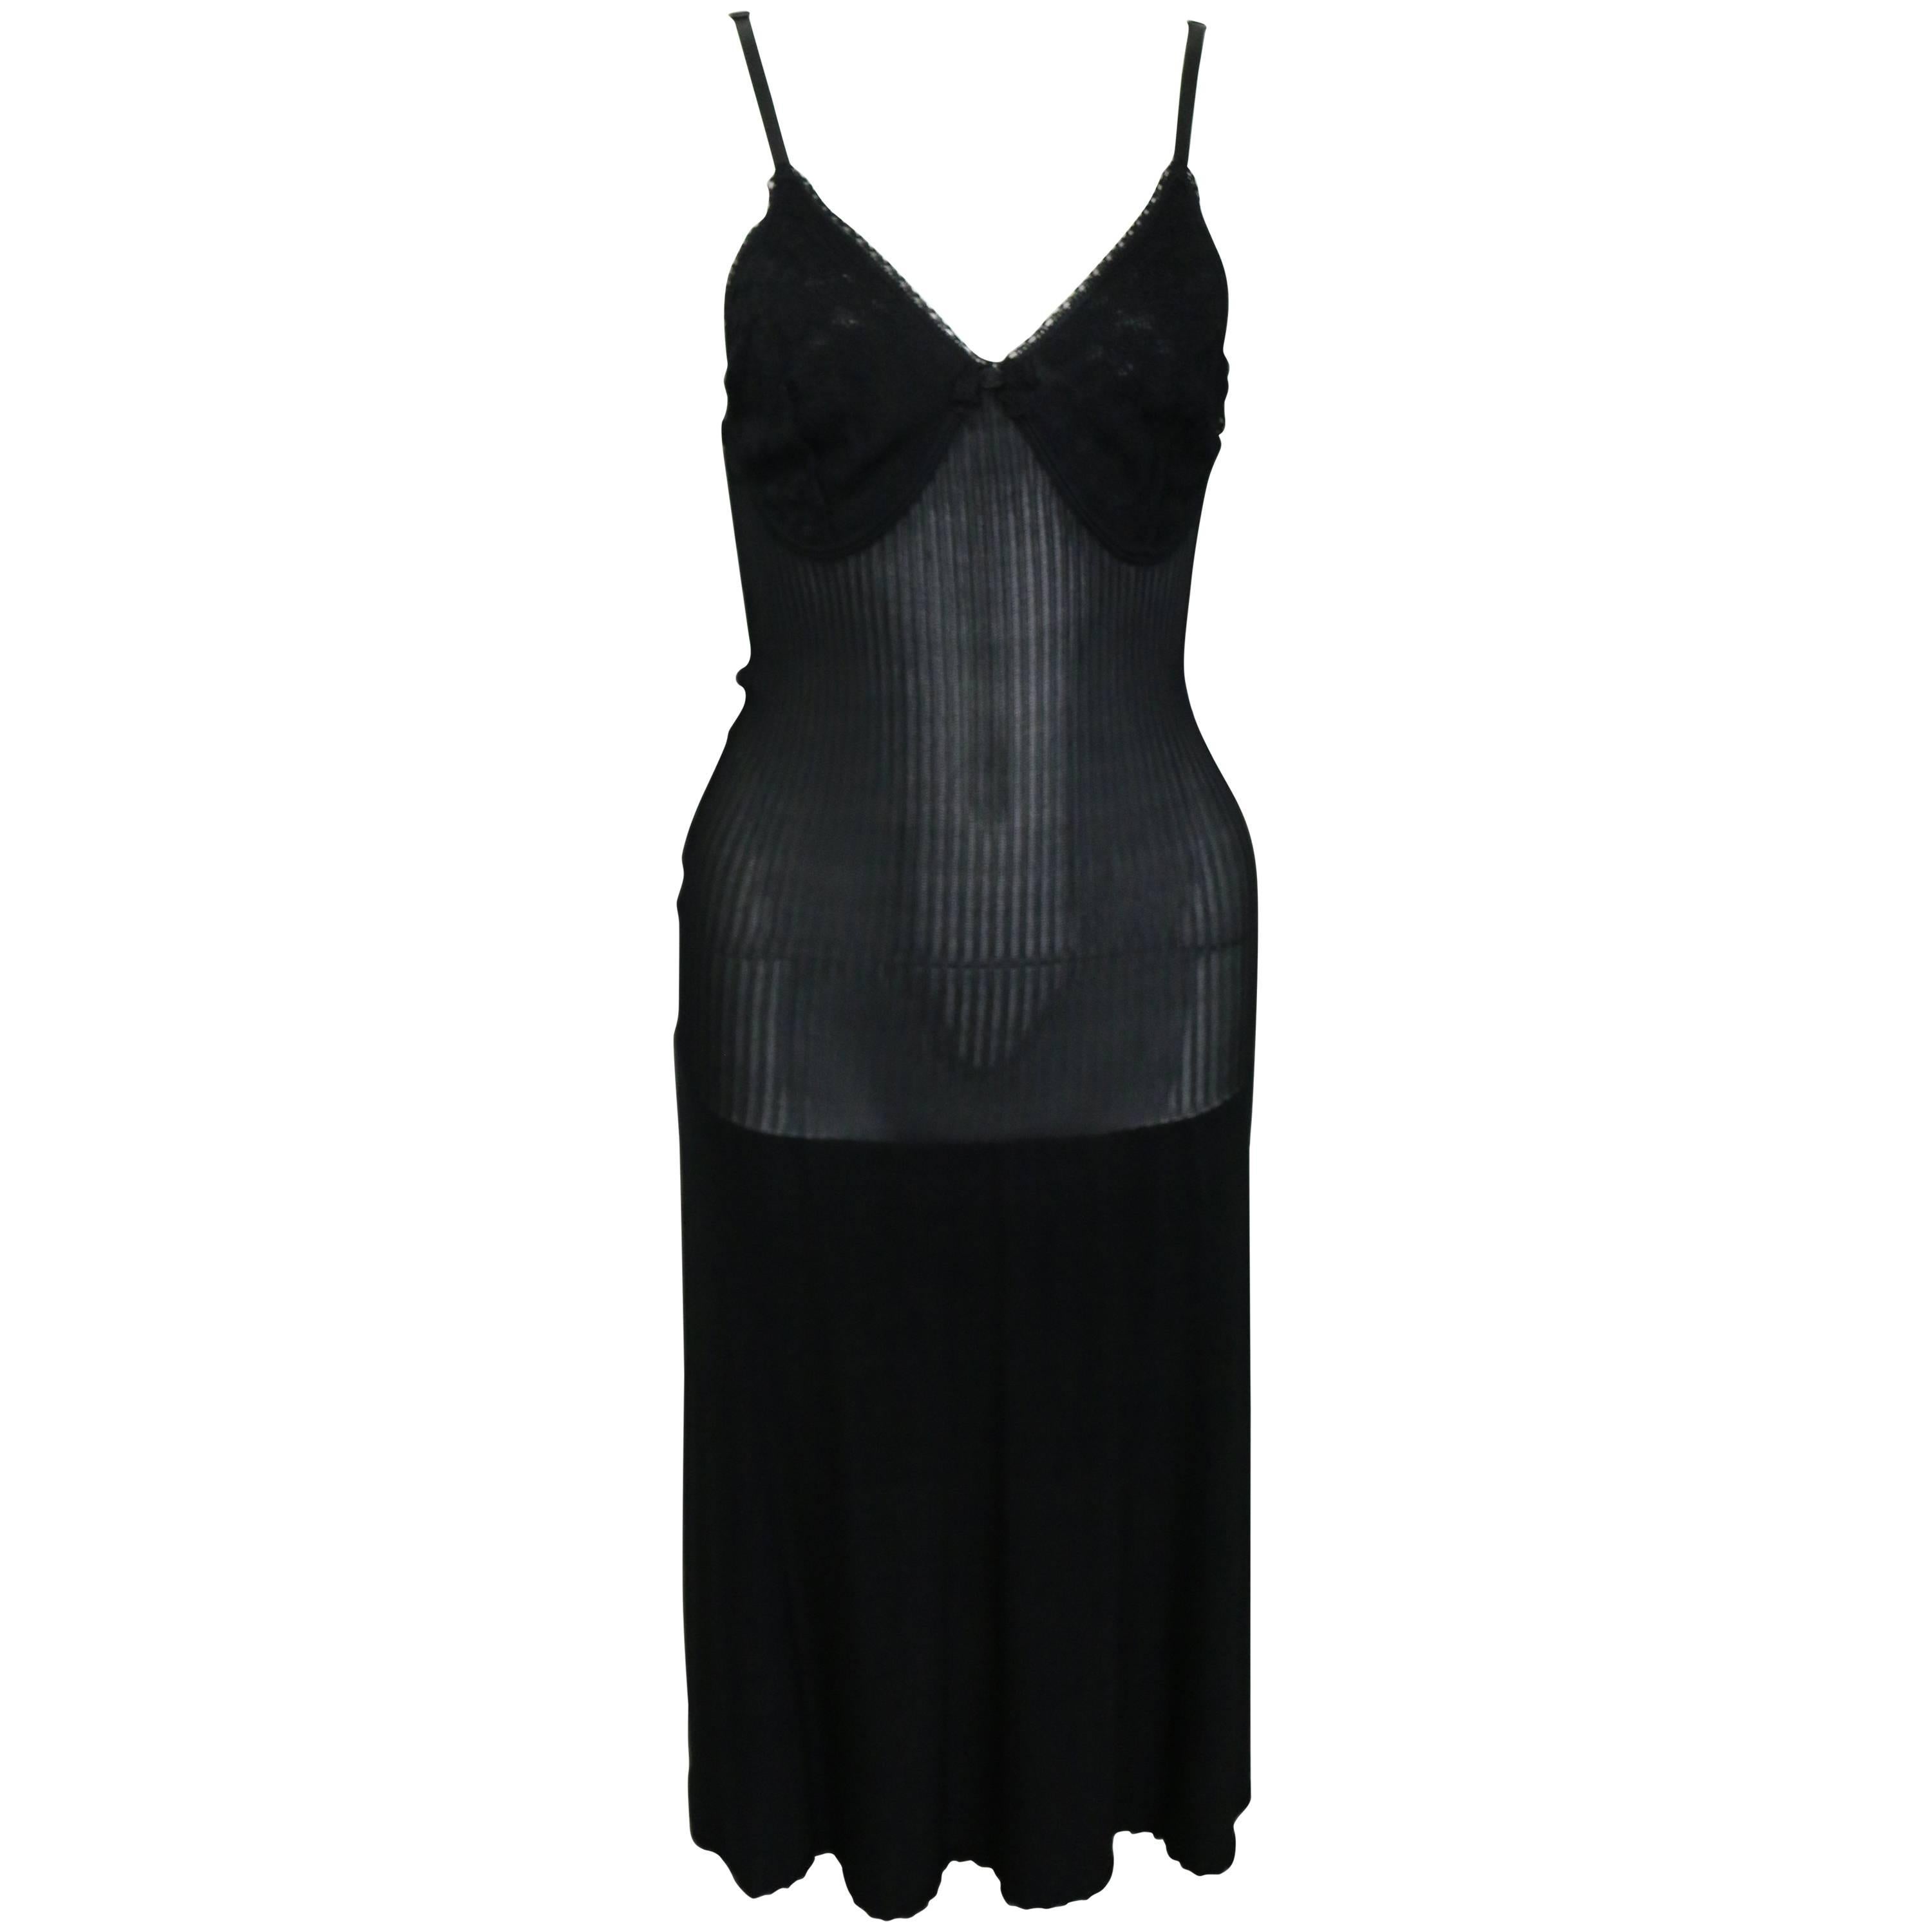 2008 Chanel Black Lace and Knitted Spaghetti Strap Dress  For Sale